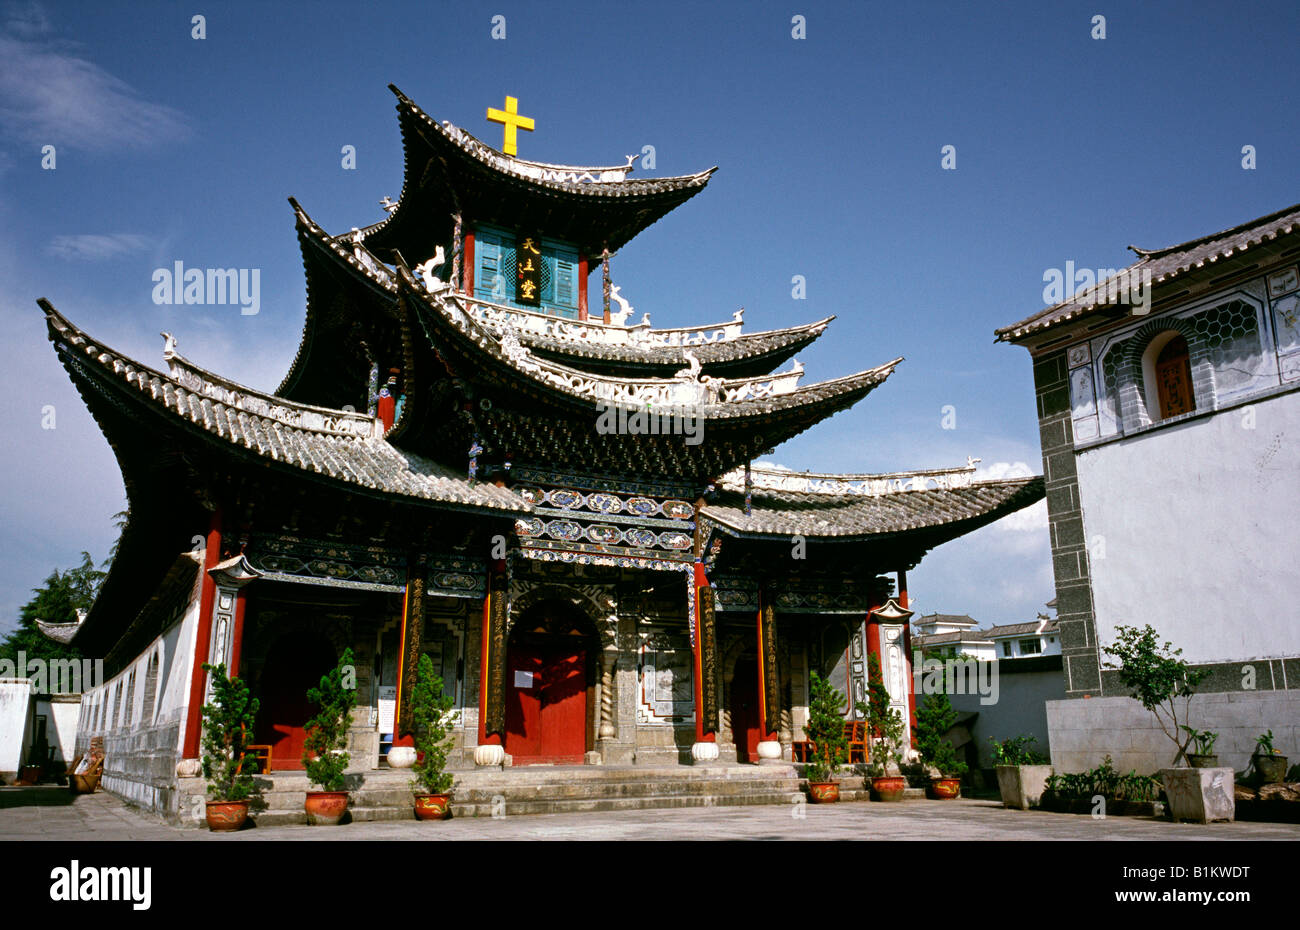 Aug 15, 2006 - Christian church built like a pagoda in Dali (Old Town) in the Chinese province of Yunnan. Stock Photo